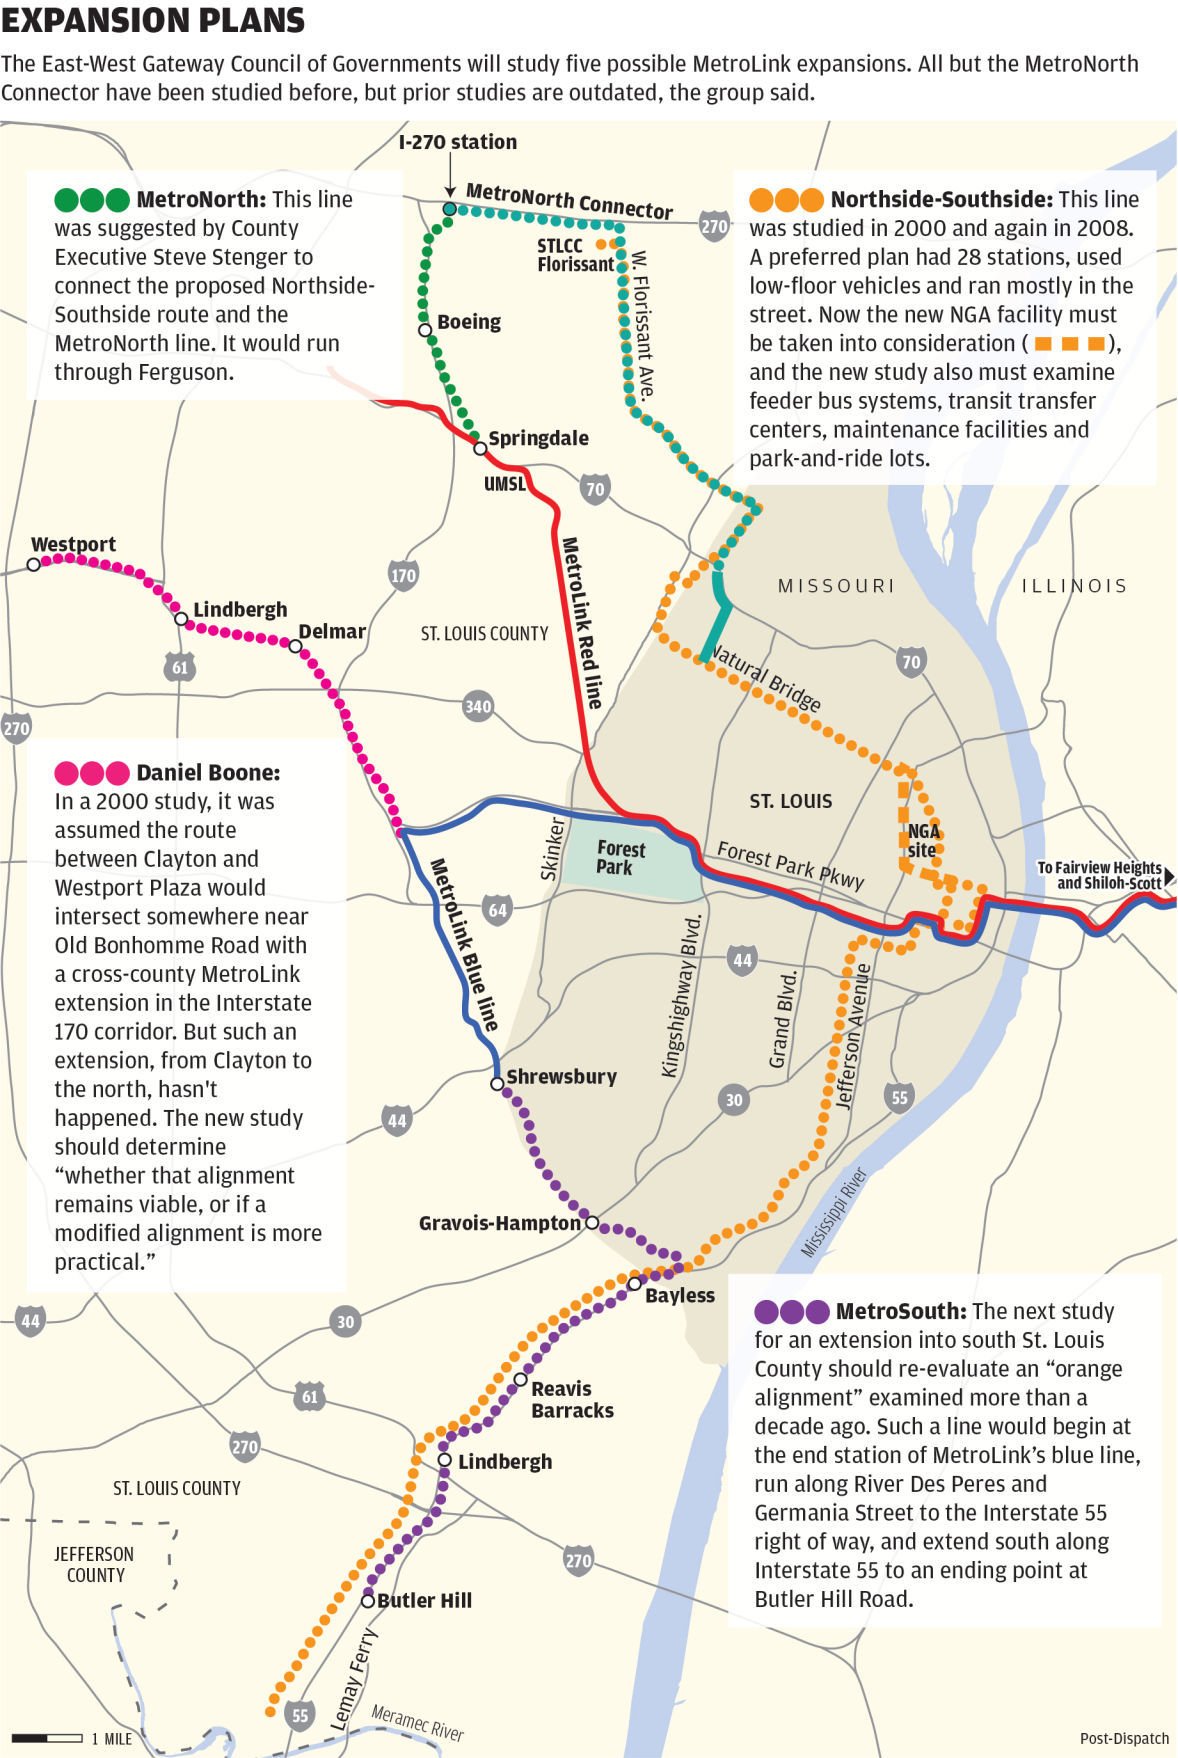 About $375,000 in federal money to help plan Northside-Southside MetroLink expansion | Political ...